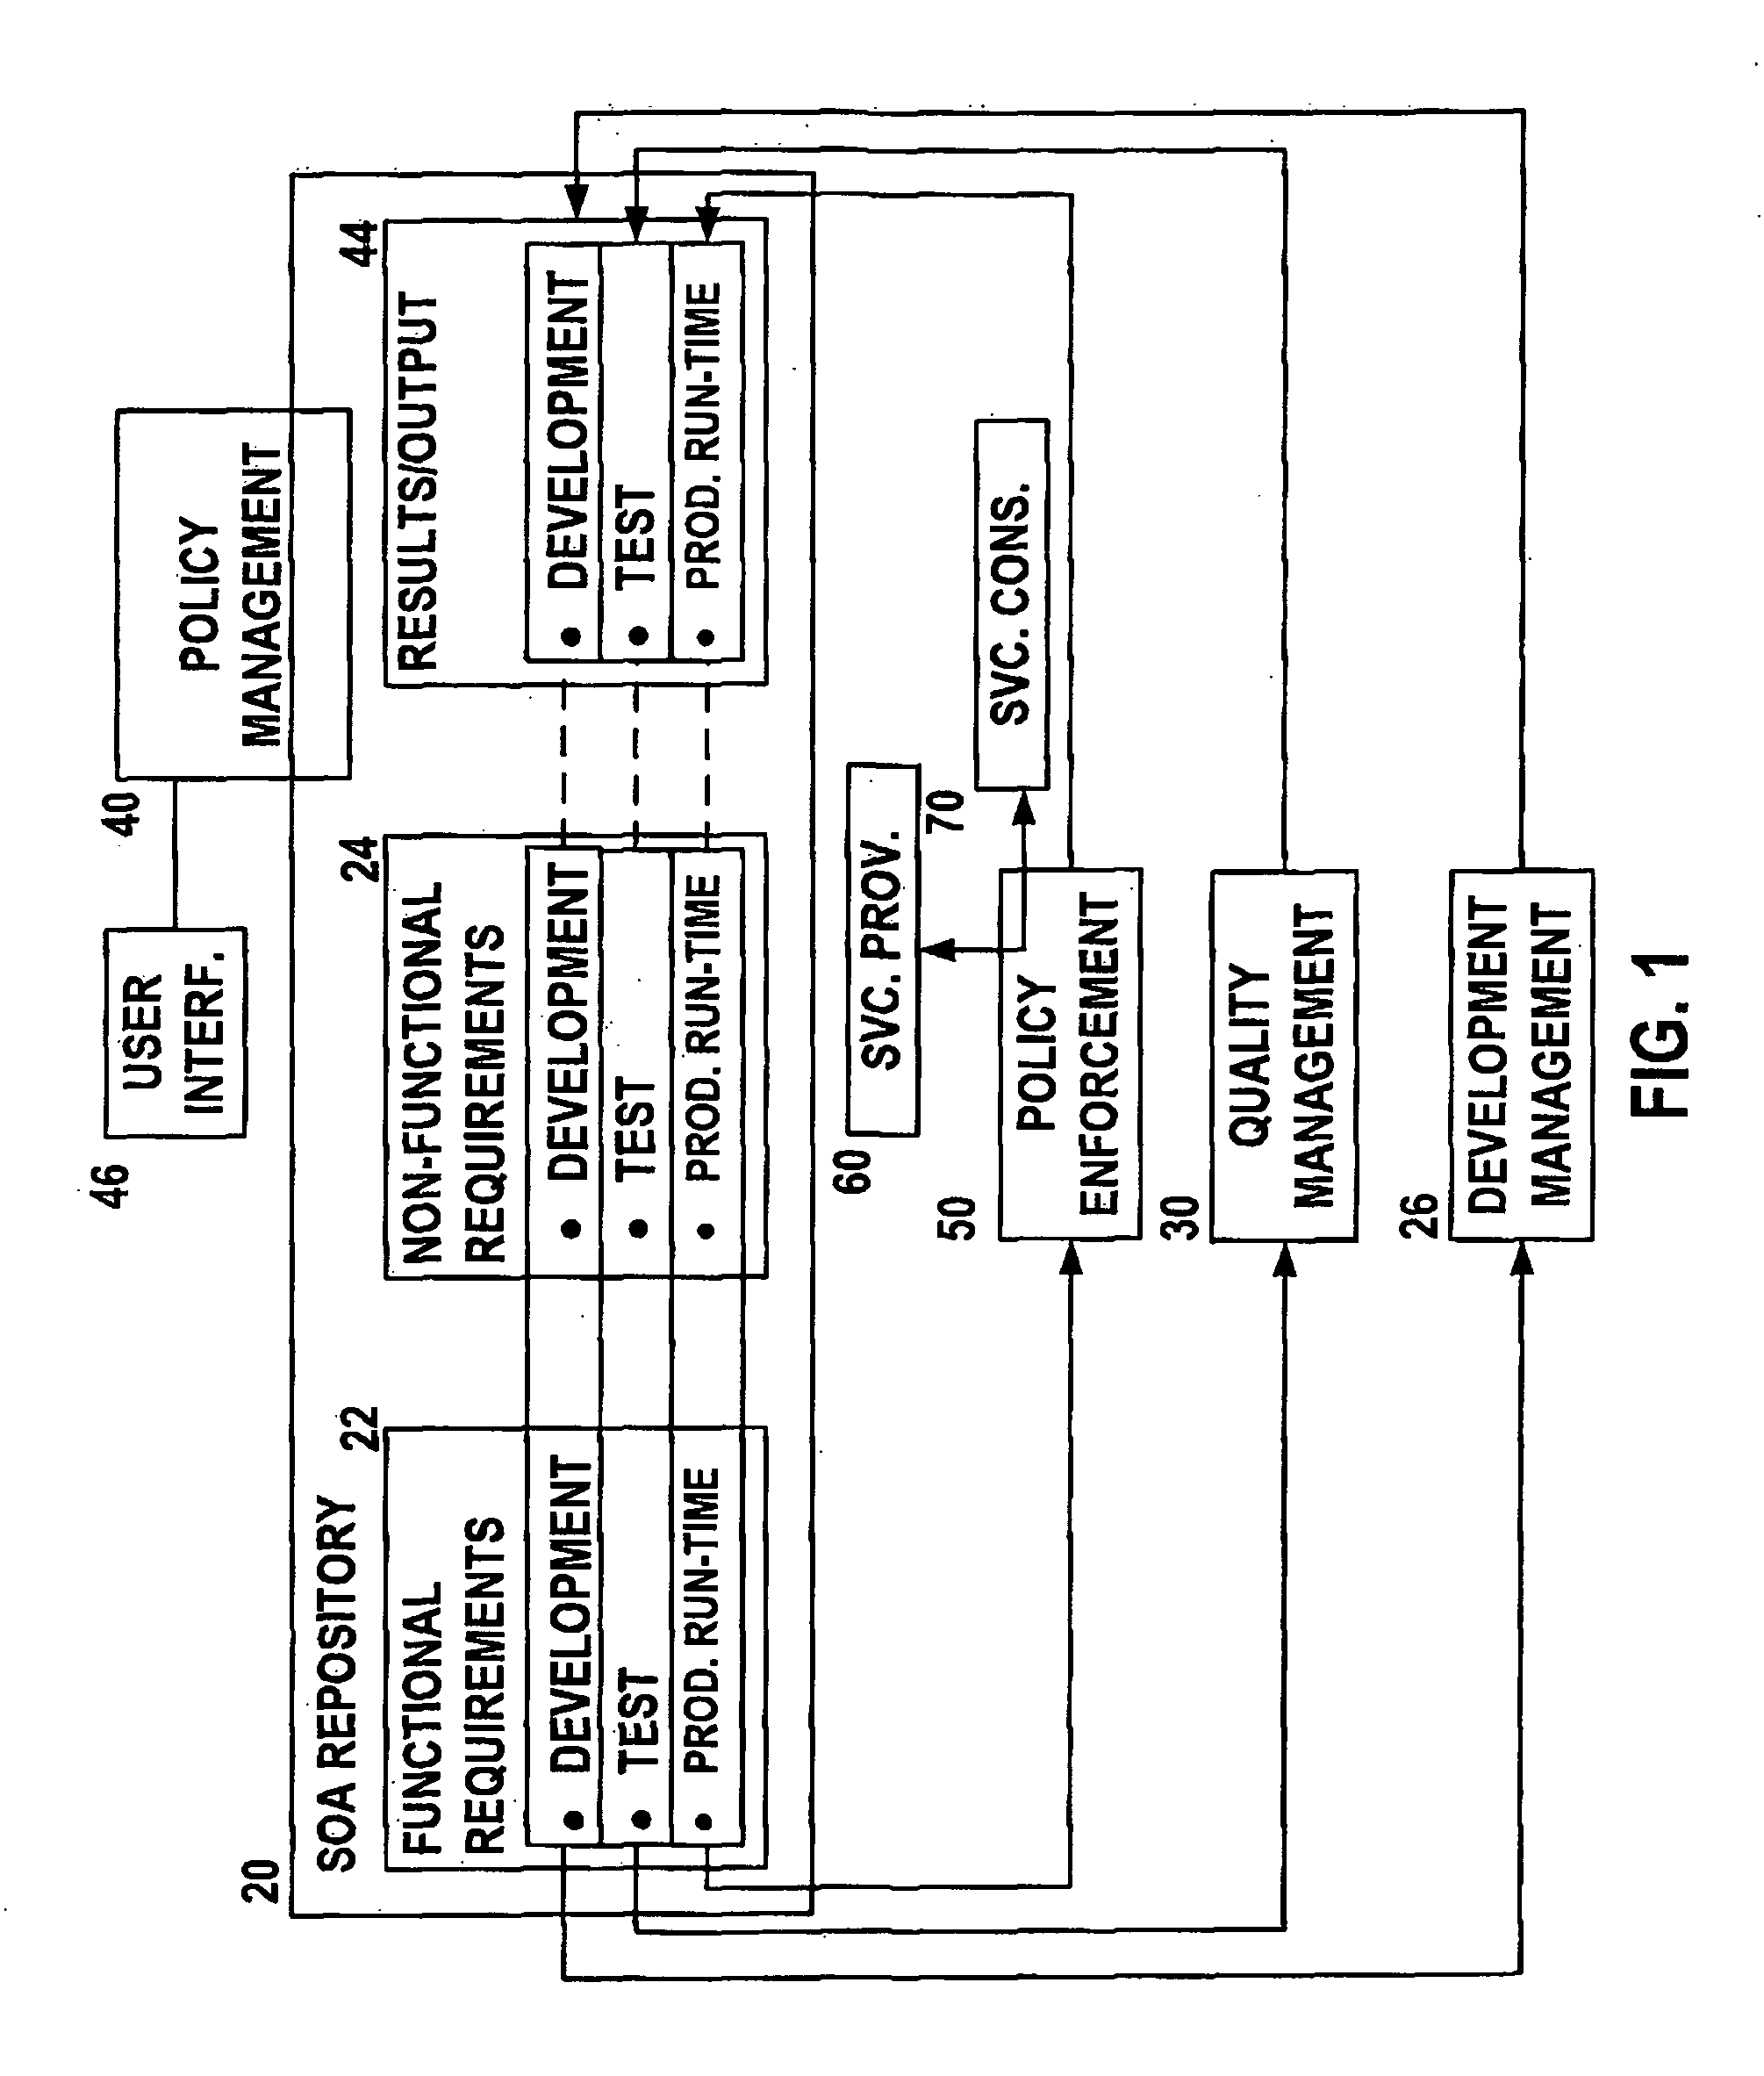 Integrated soa deployment and management system and method for software services